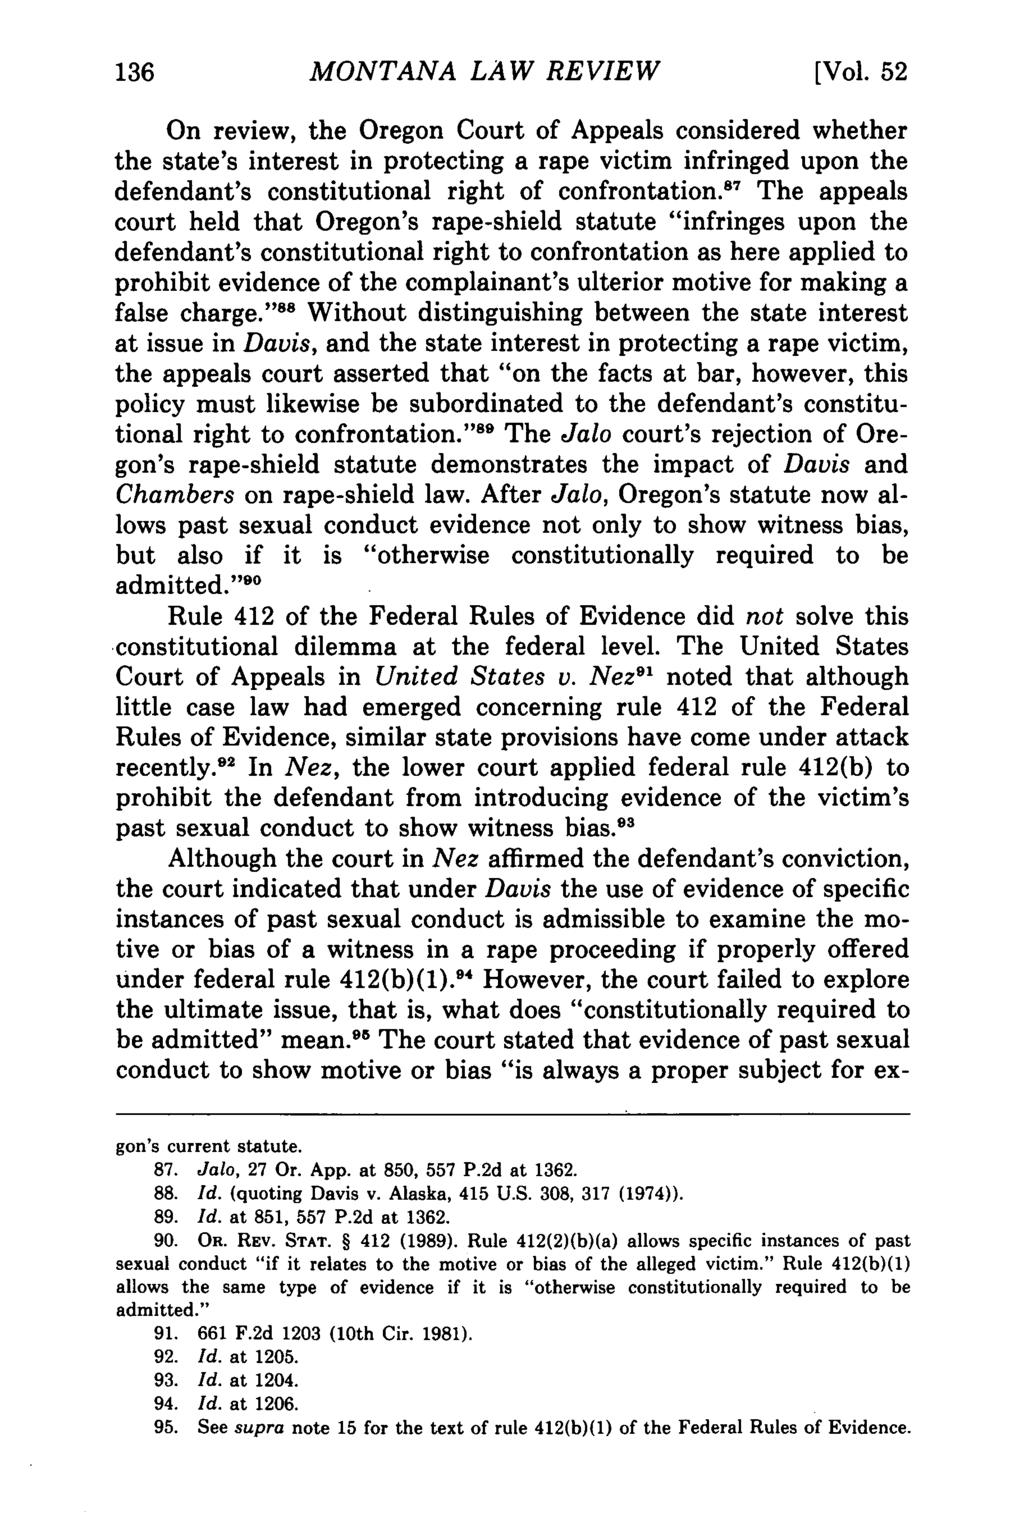 136 Montana Law Review, Vol. 52 [1991], Iss. 1, Art. 8 MONTANA LAW REVIEW [Vol.